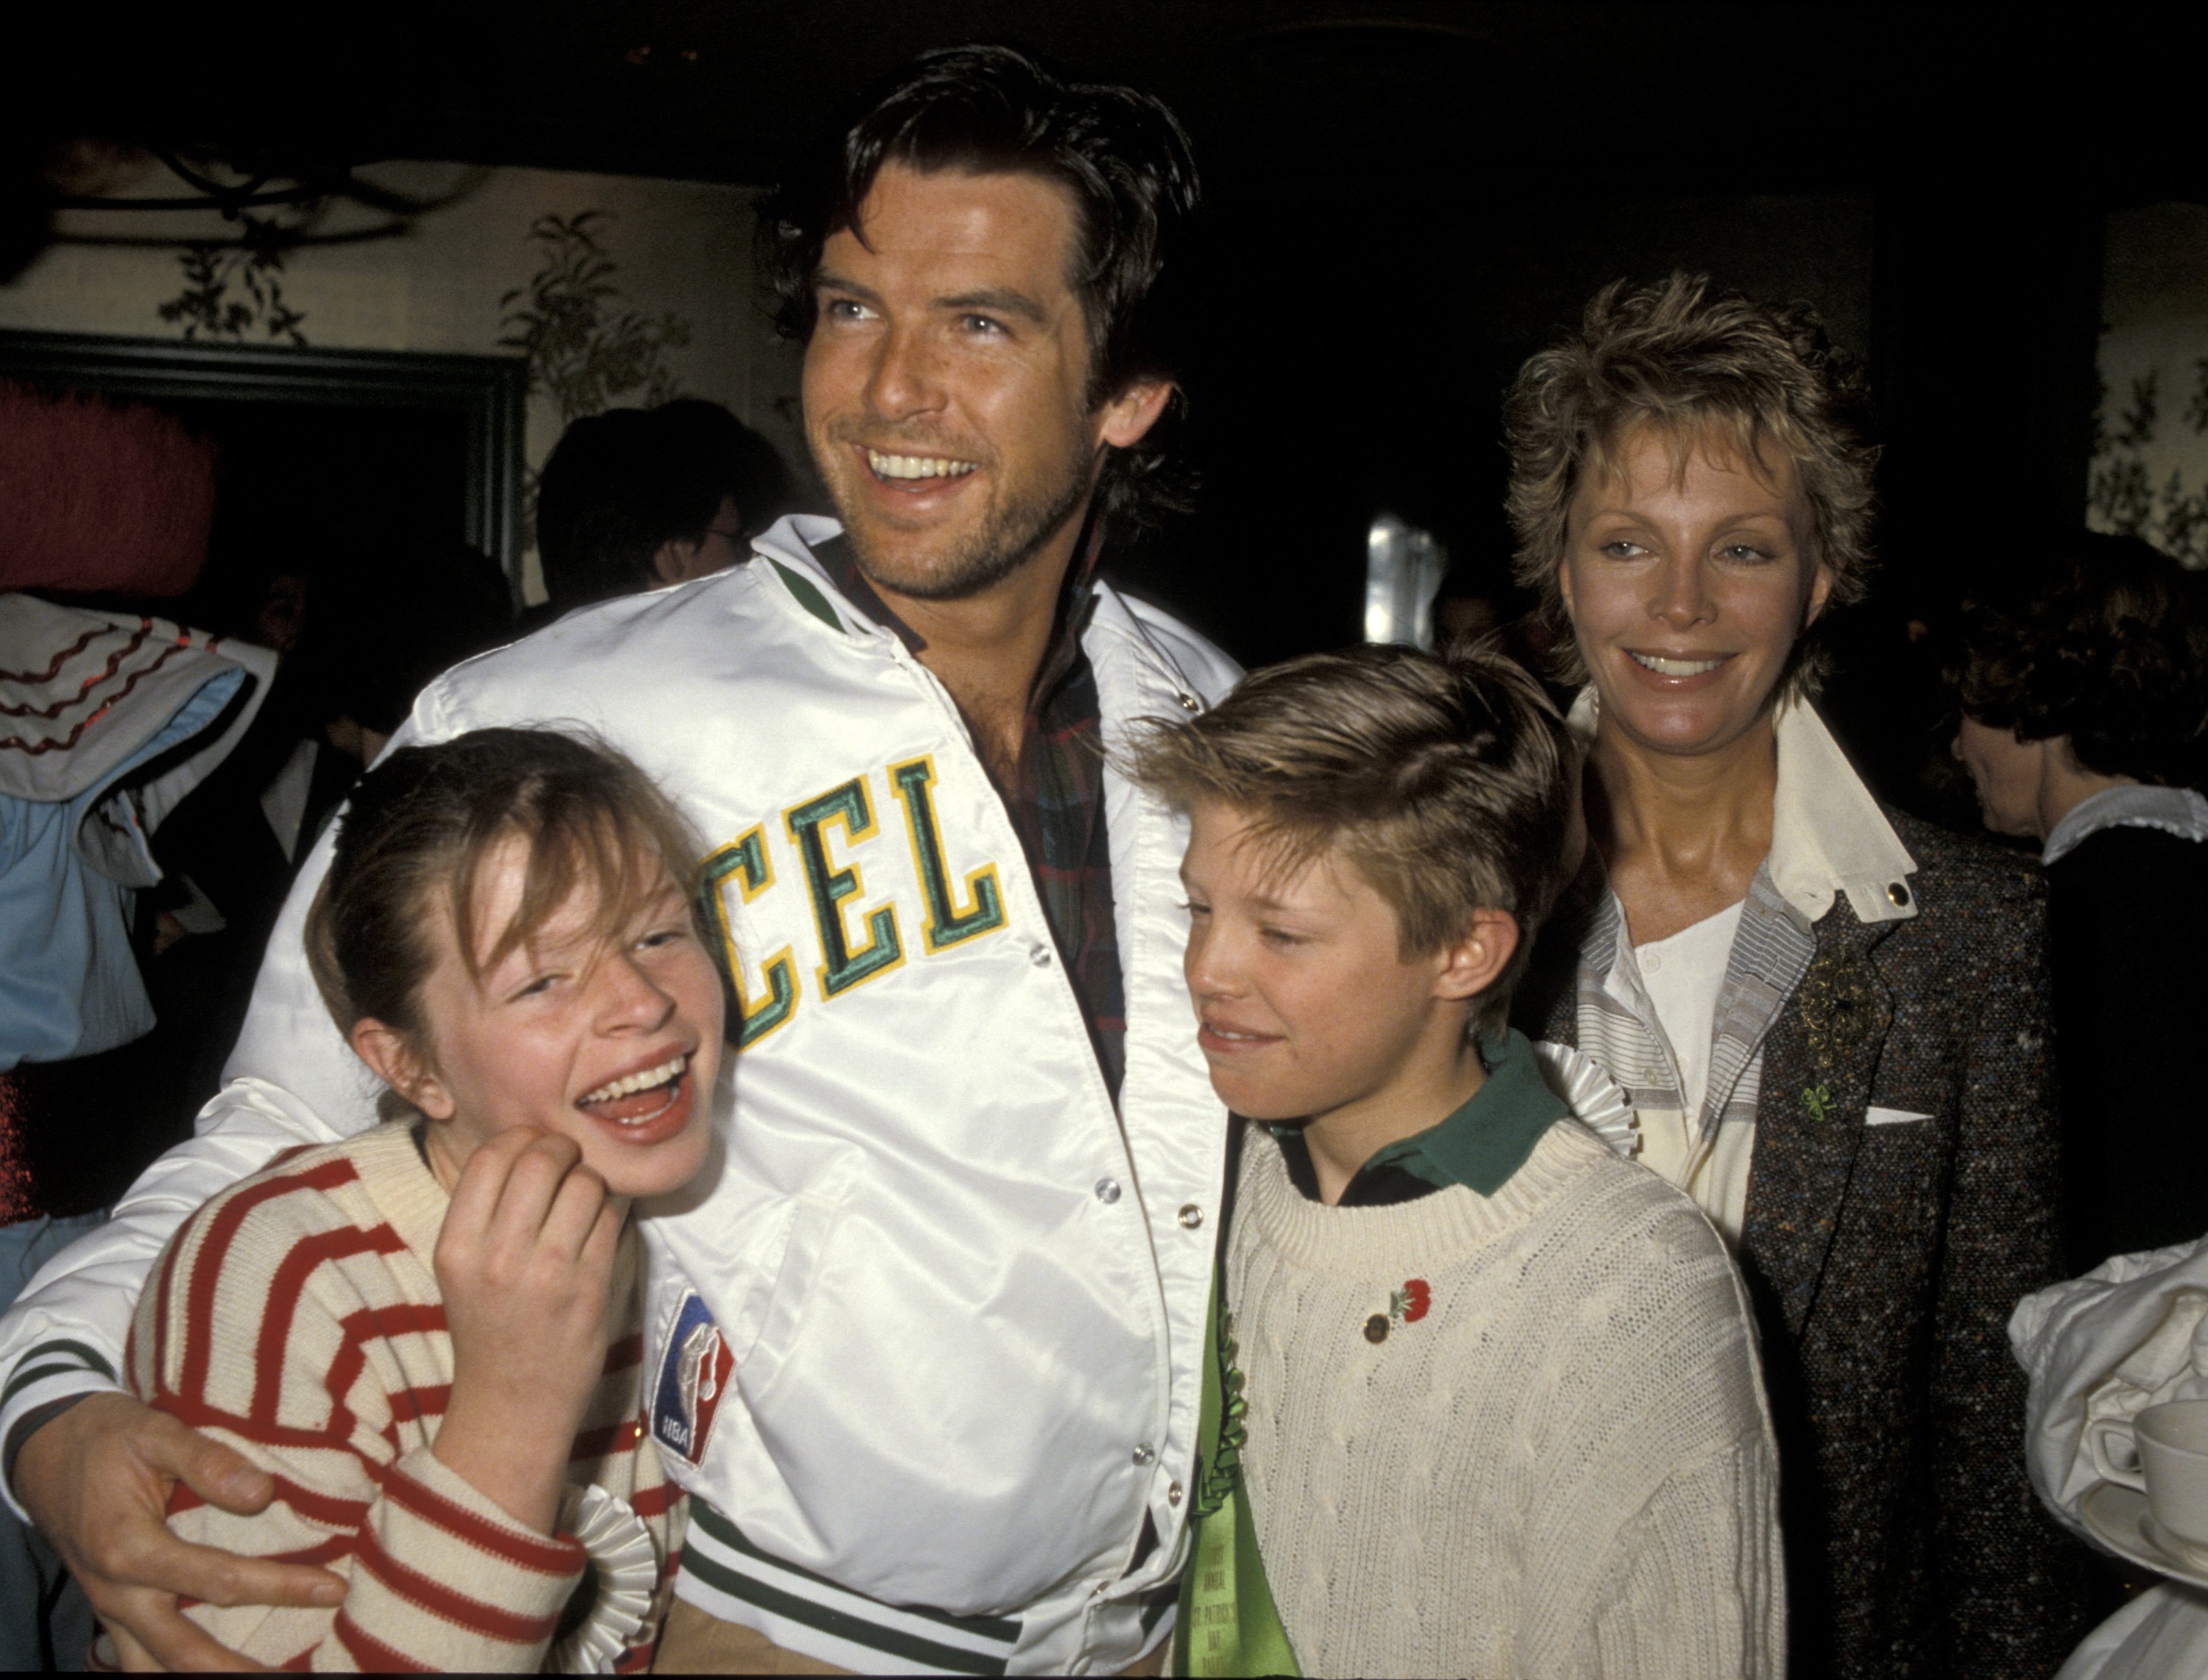 Pierce Brosnan, wife Charlotte Harris, and children Charlotte Harris and Christopher Harris | Source: Getty Images